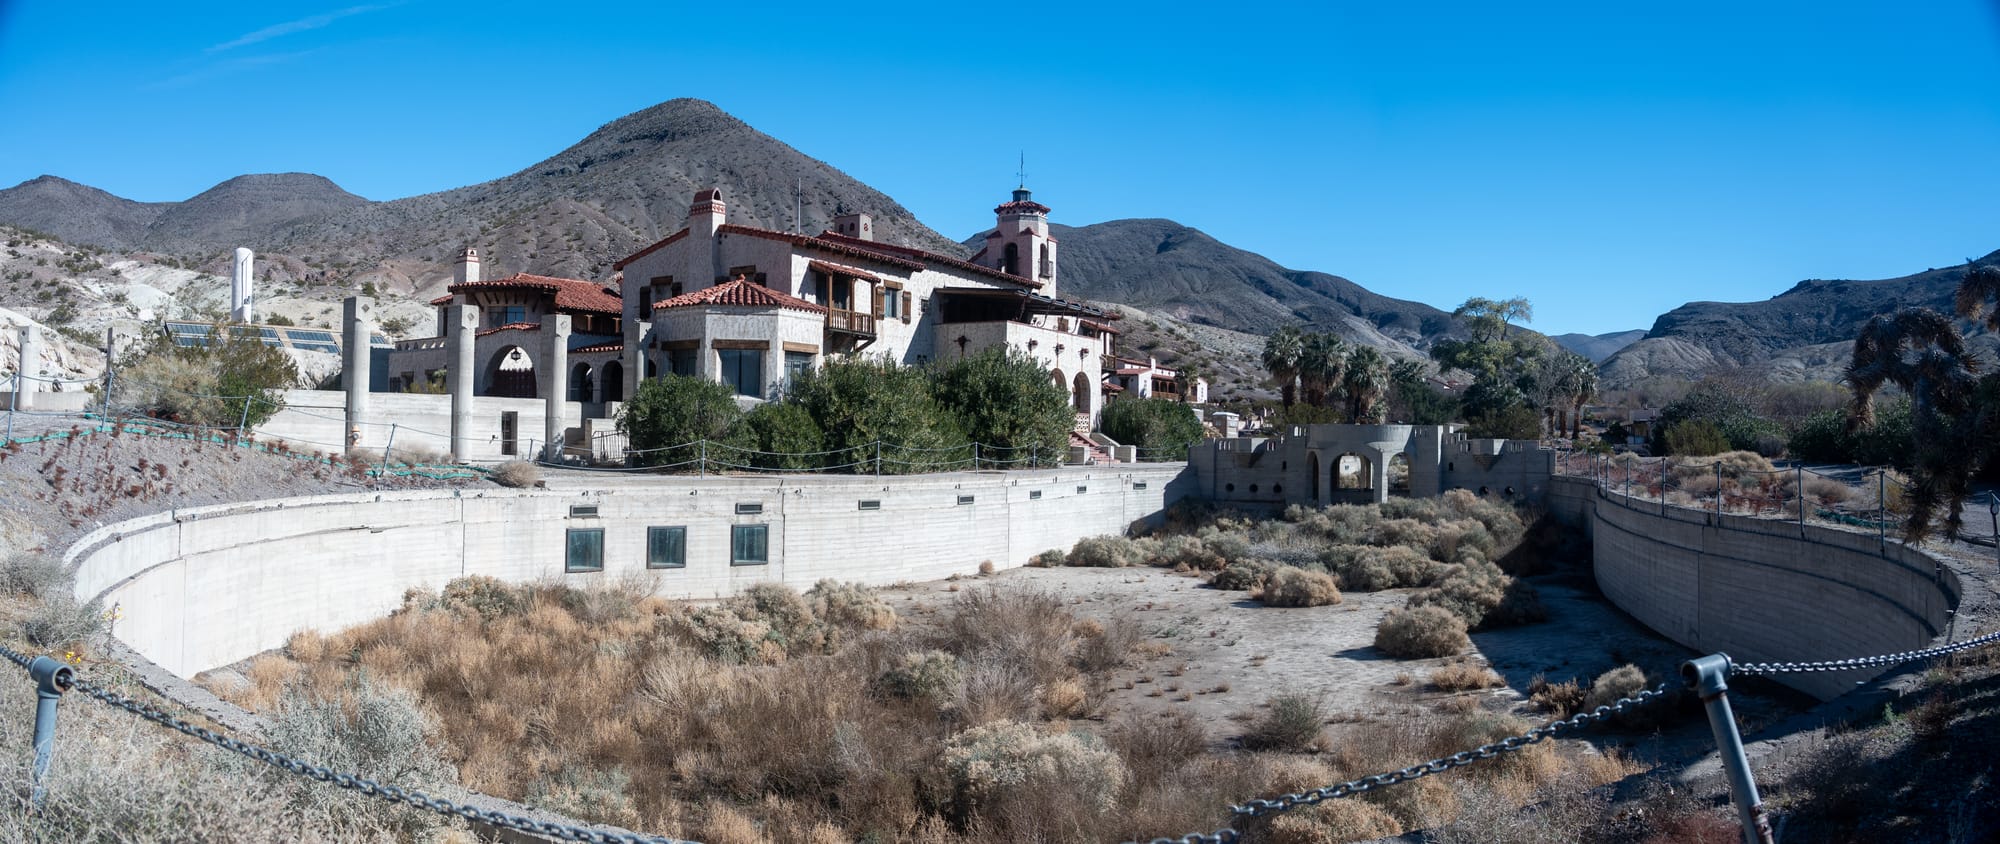 Scotty's Castle Flood Recovery Tour